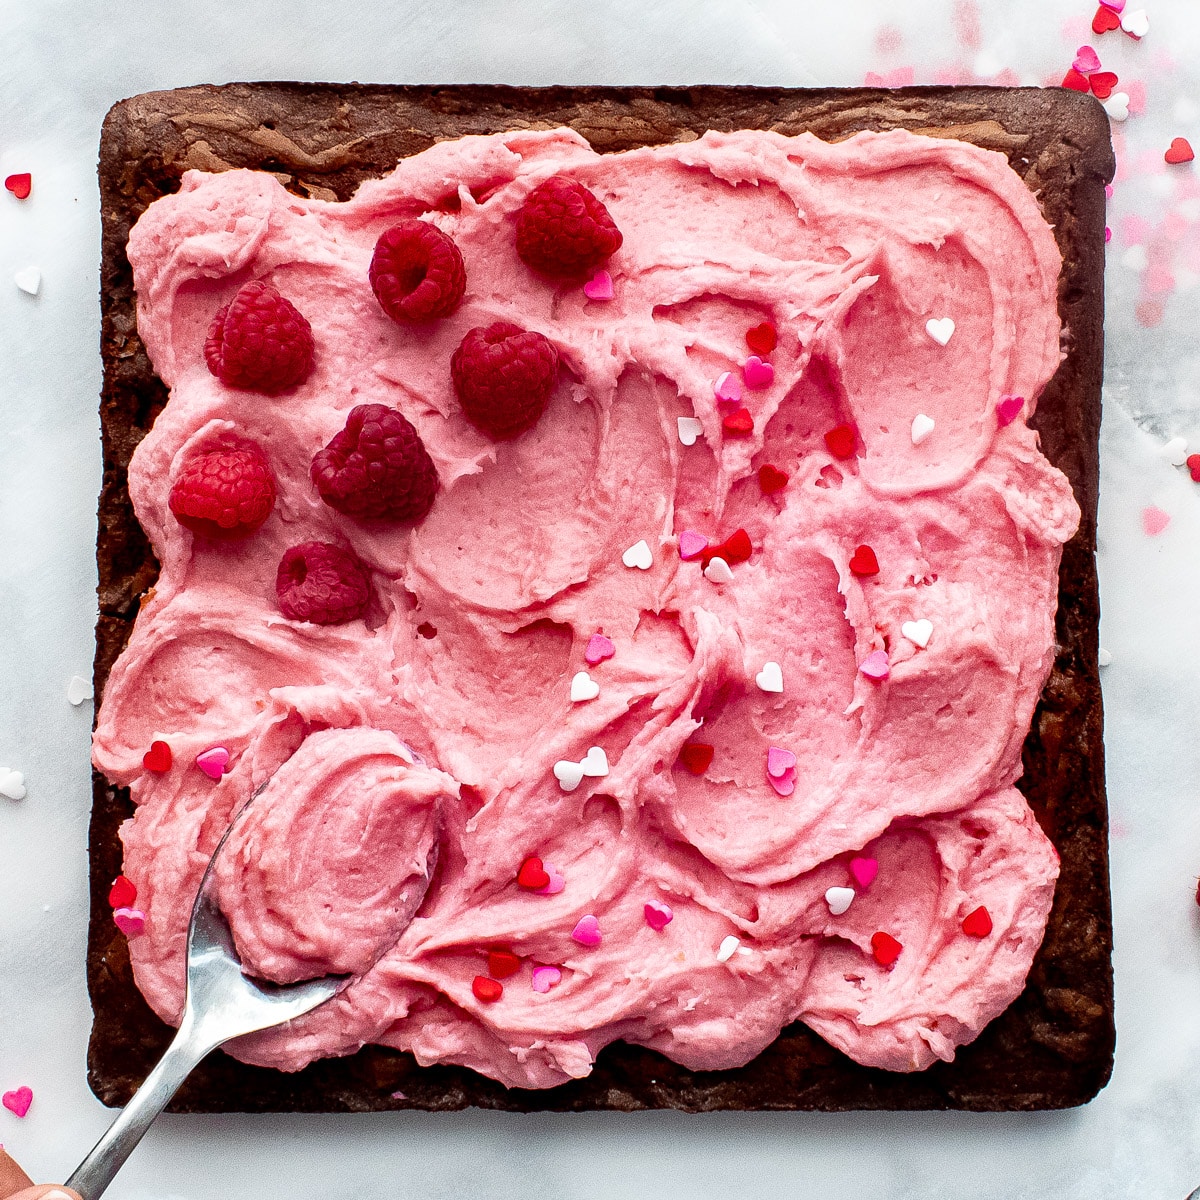 A spoon spreading frosting on raspberry chocolate brownies with fresh raspberries and sprinkles